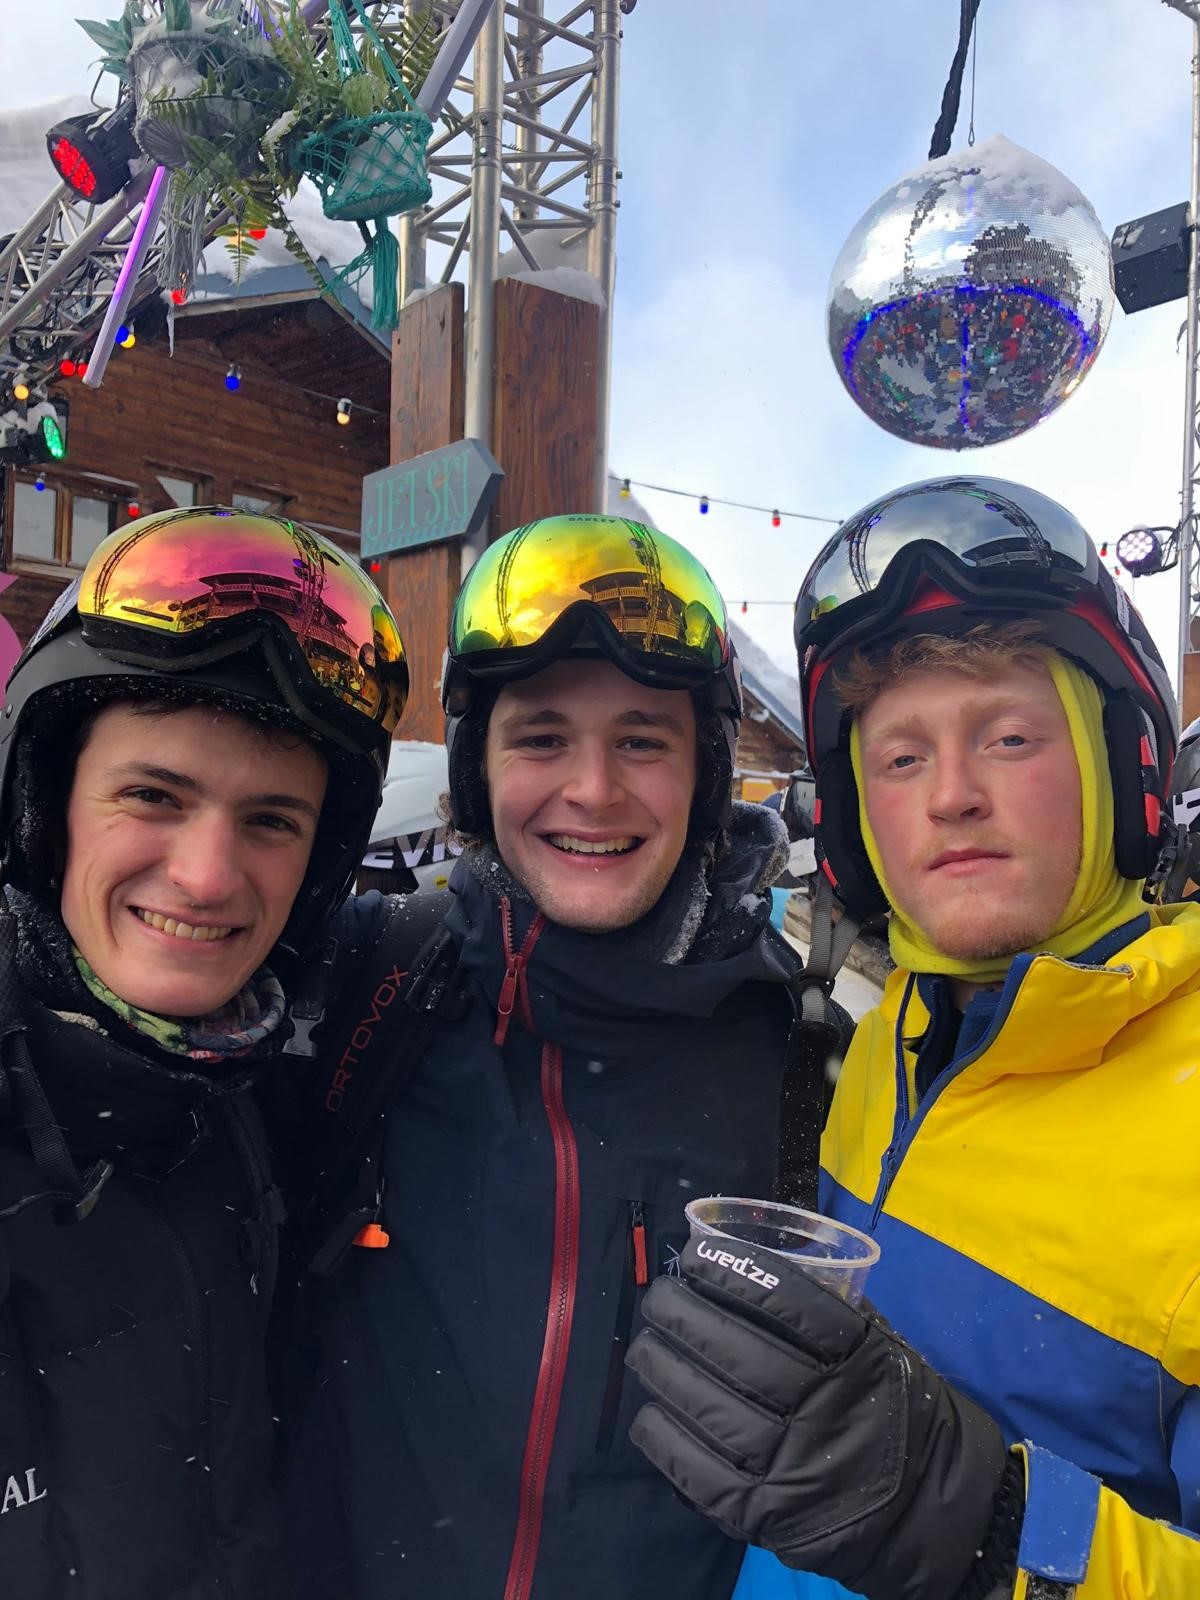 three men in ski gear, one holding a drink, smiling at the camera